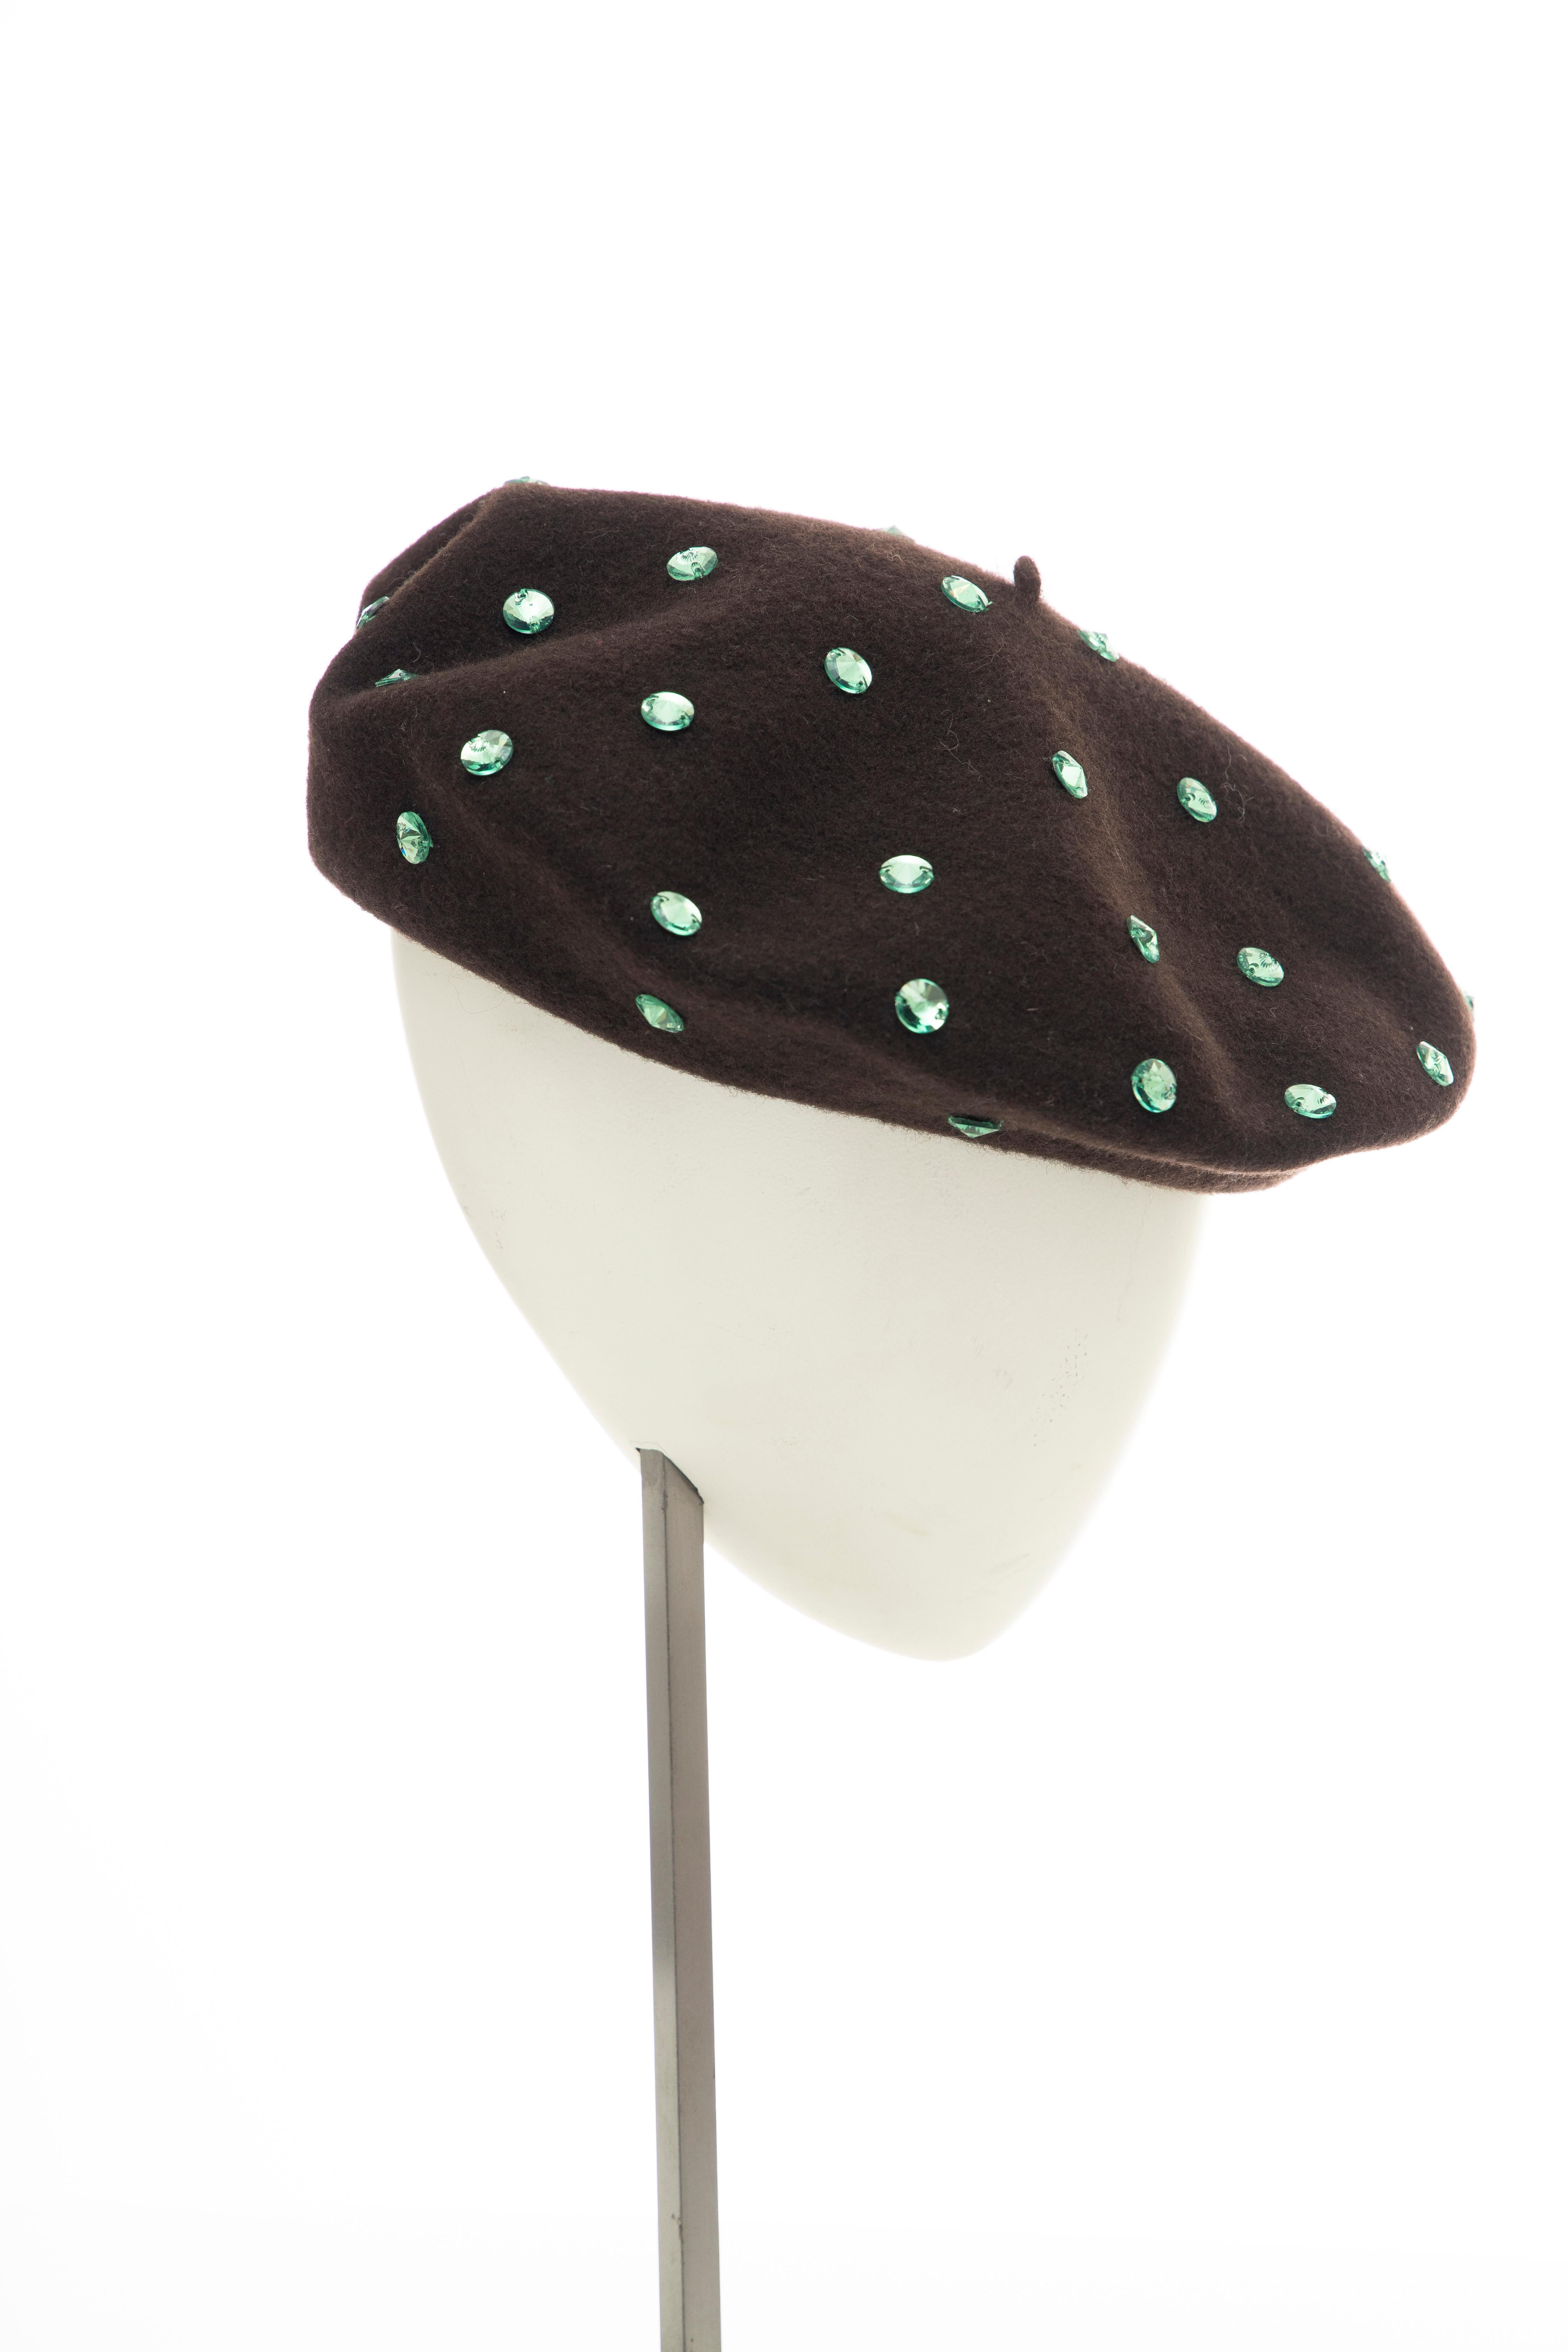 Dolce & Gabbana Wool Chocolate Brown Turquoise Cut Crystals Beret, Fall 2000 1